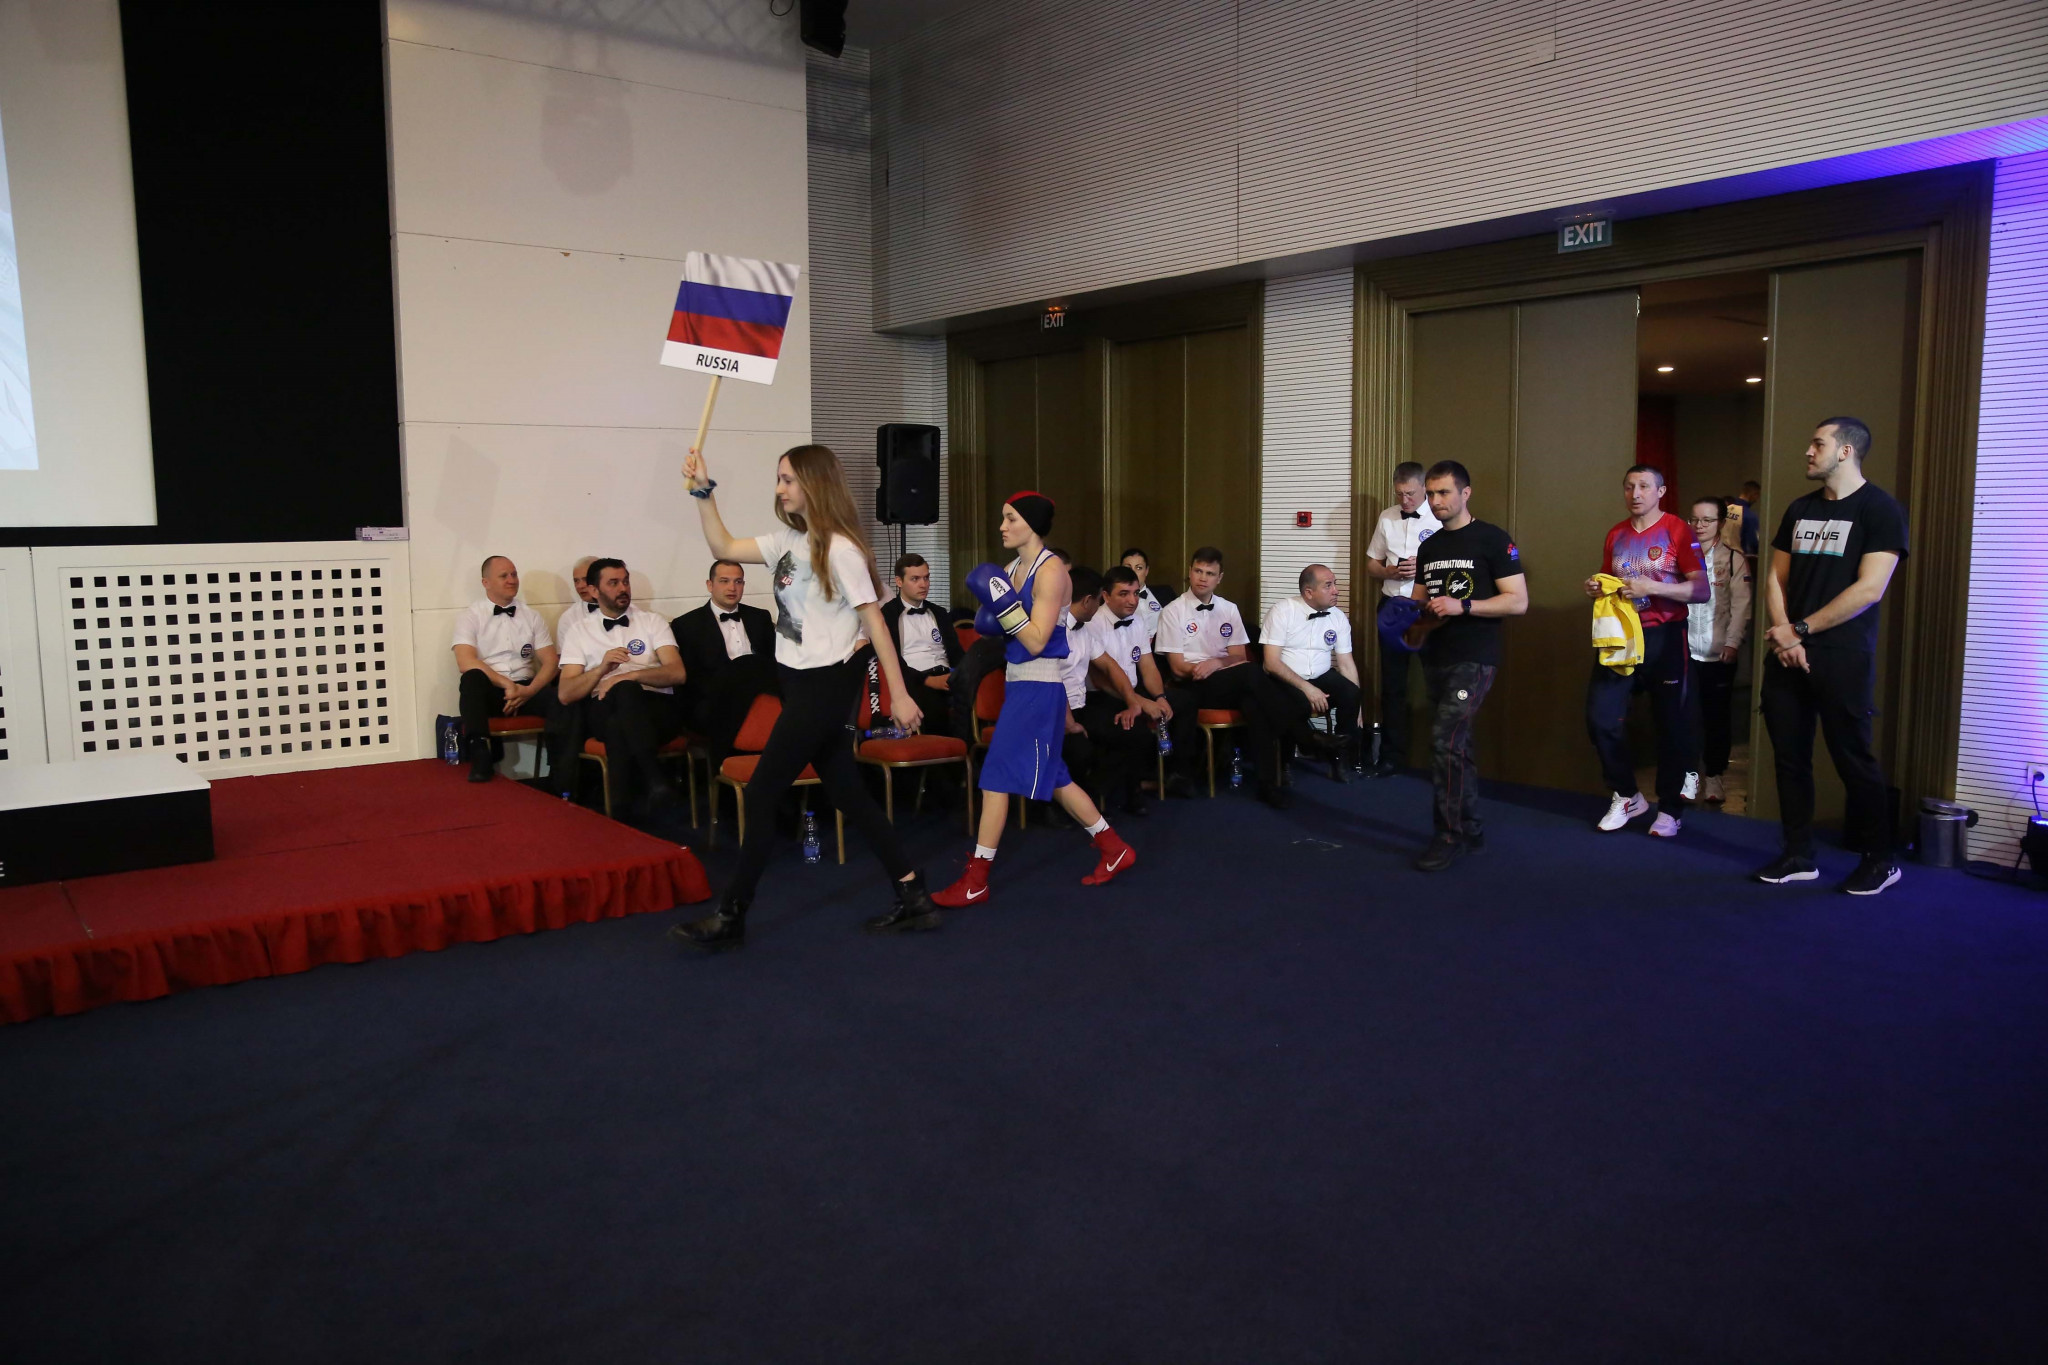 Russia dominated the Youth World Cup but several nations refused to participate due to their presence in Budva ©Boxing Association of Montenegro